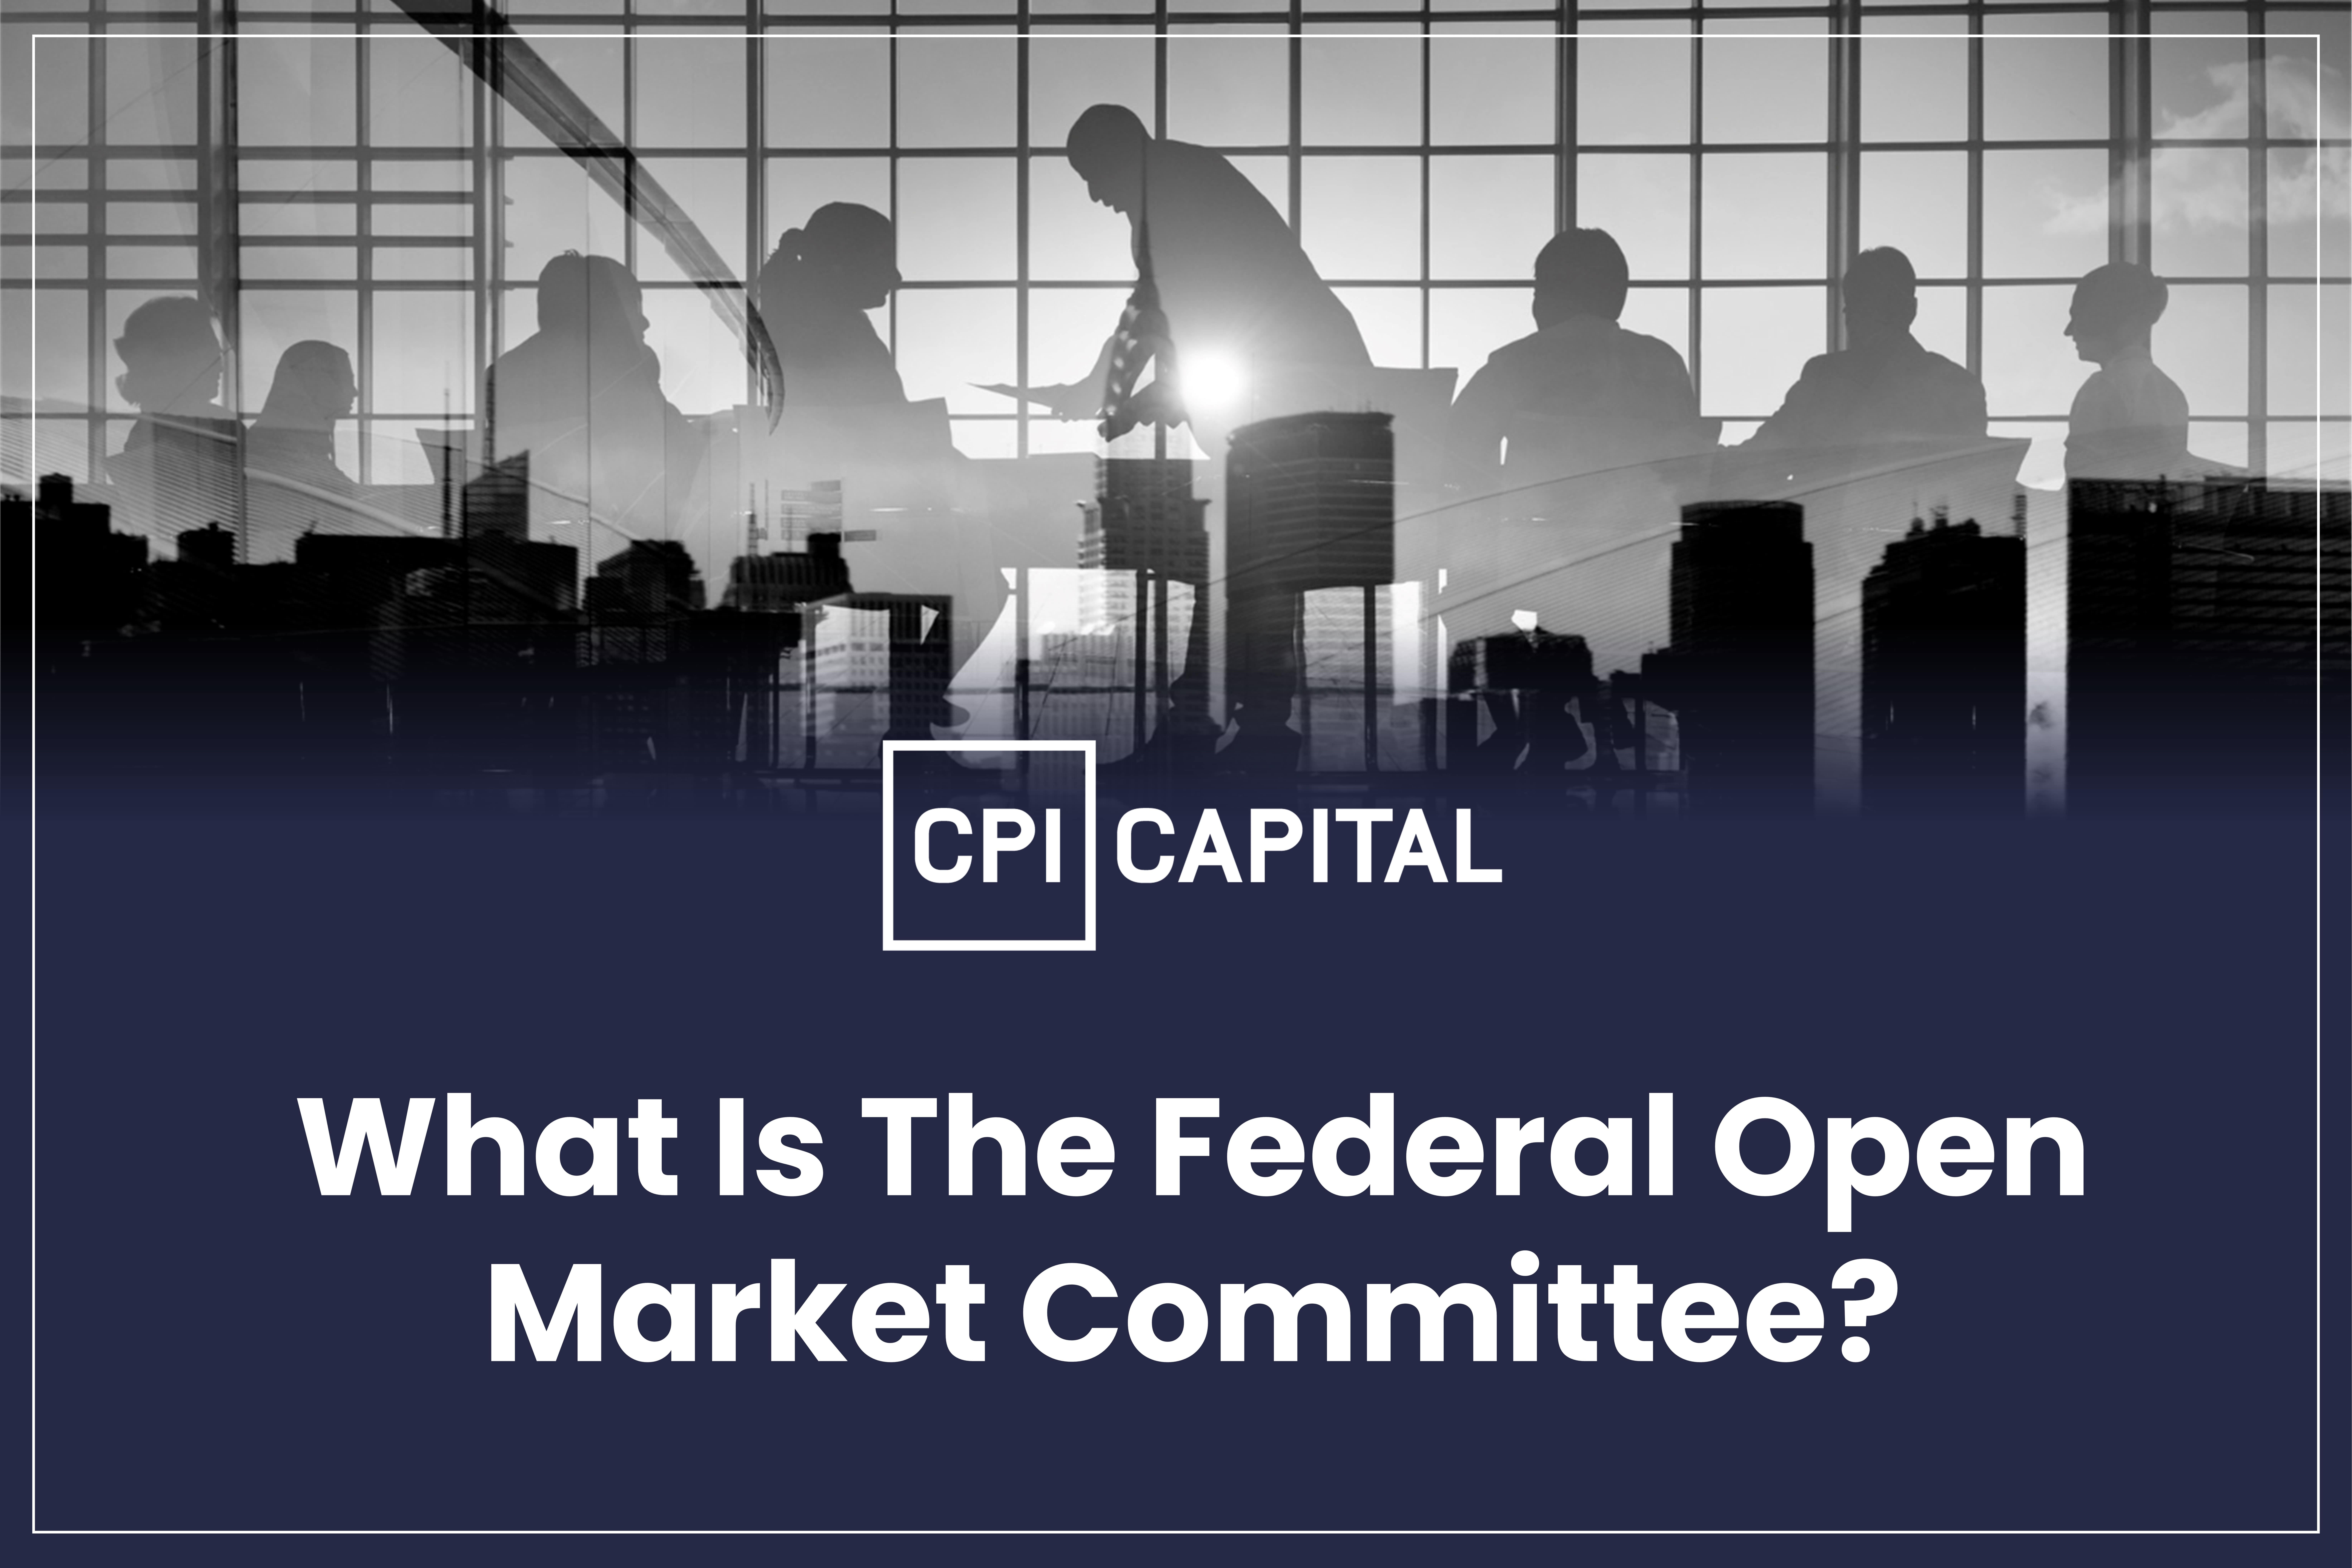 What Is The Federal Open Market Committee?